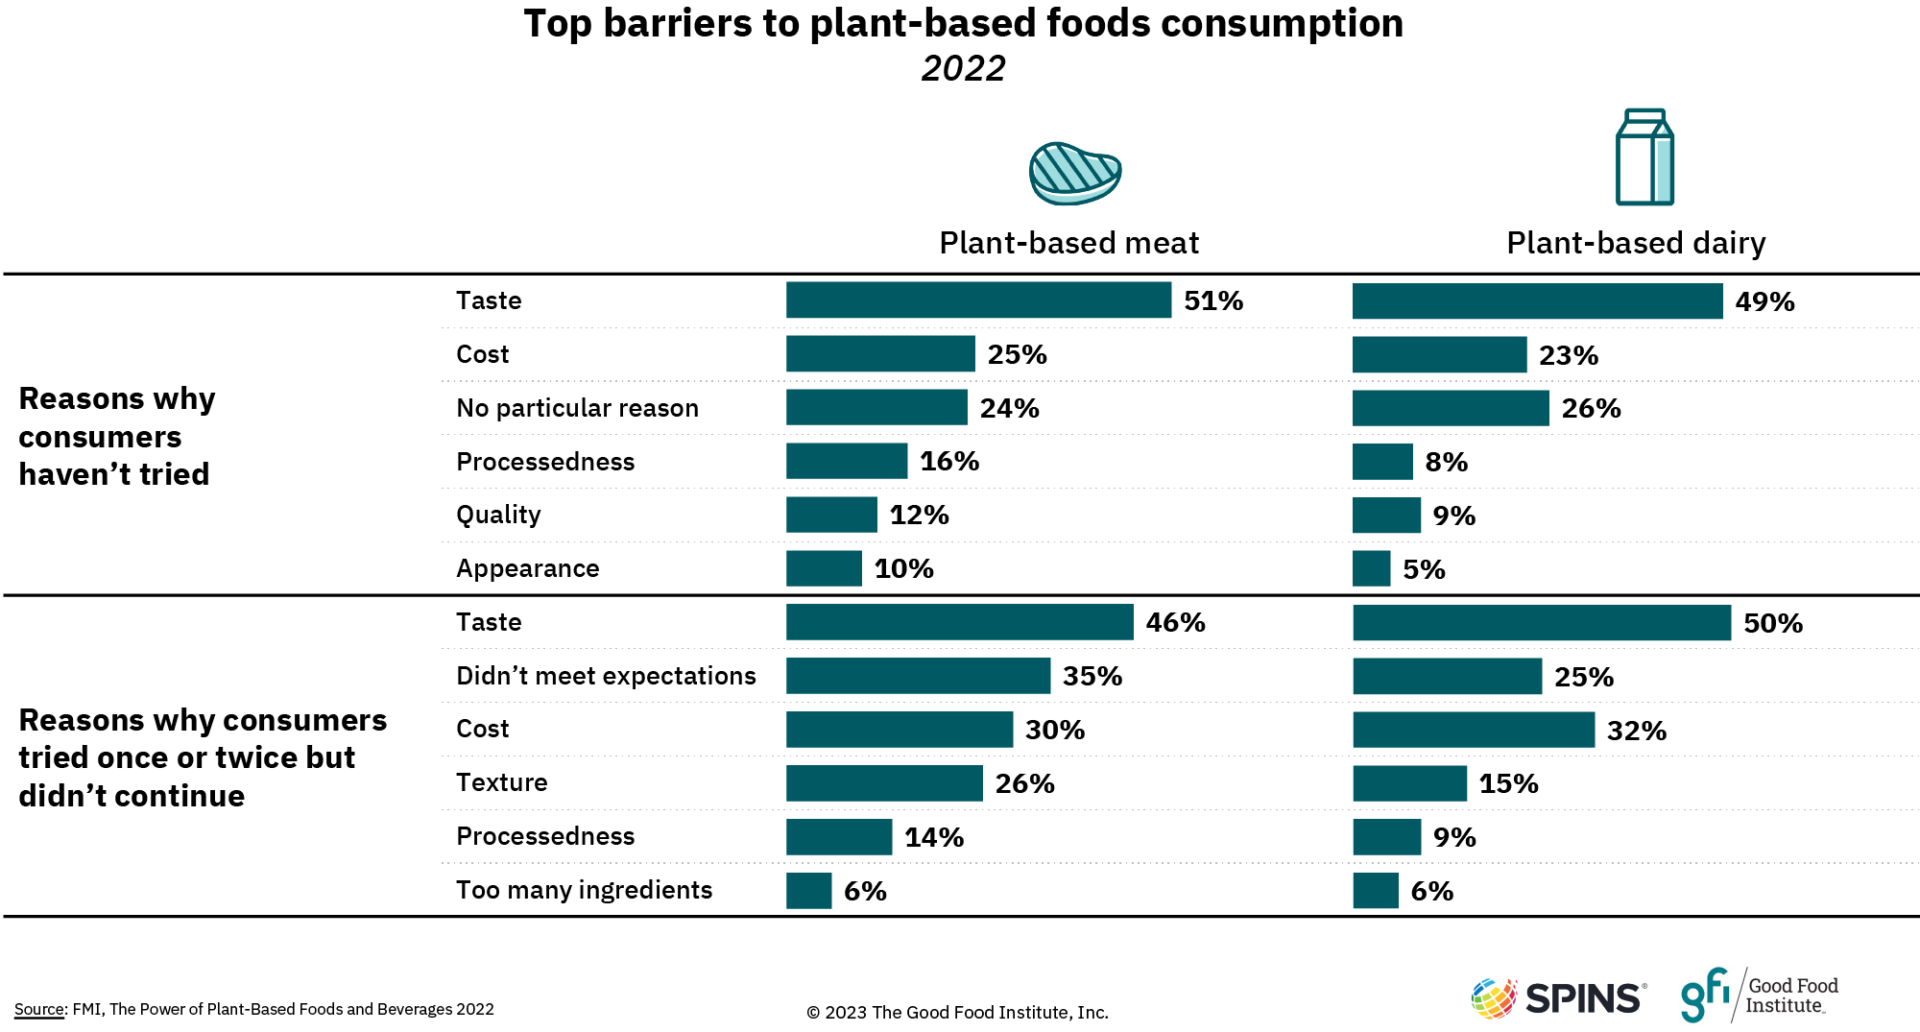 Top barriers to plant-based foods consumption